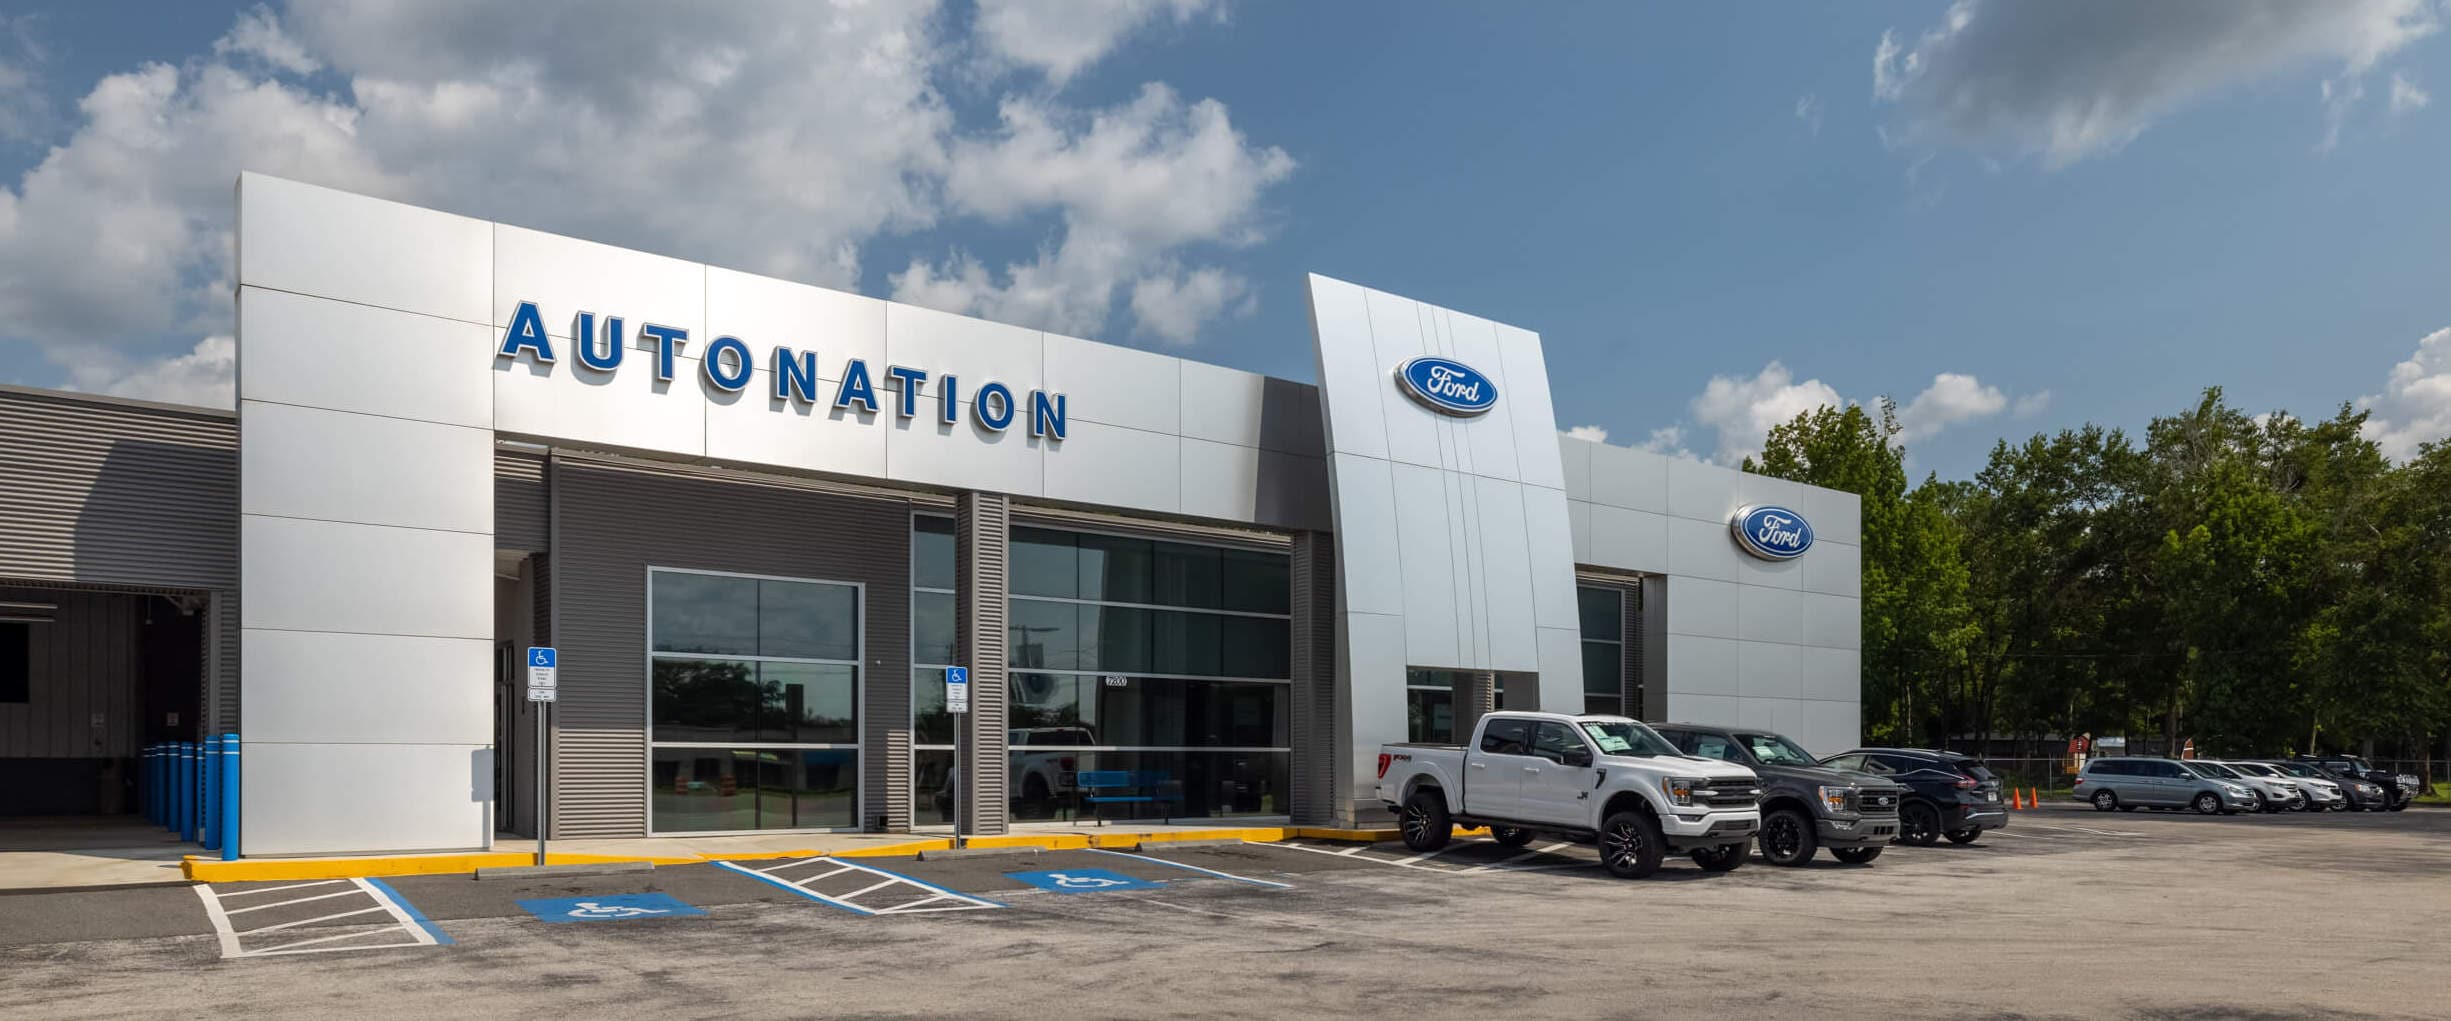 Auto Nation Ford Brooksville exterior with cars parked near the building